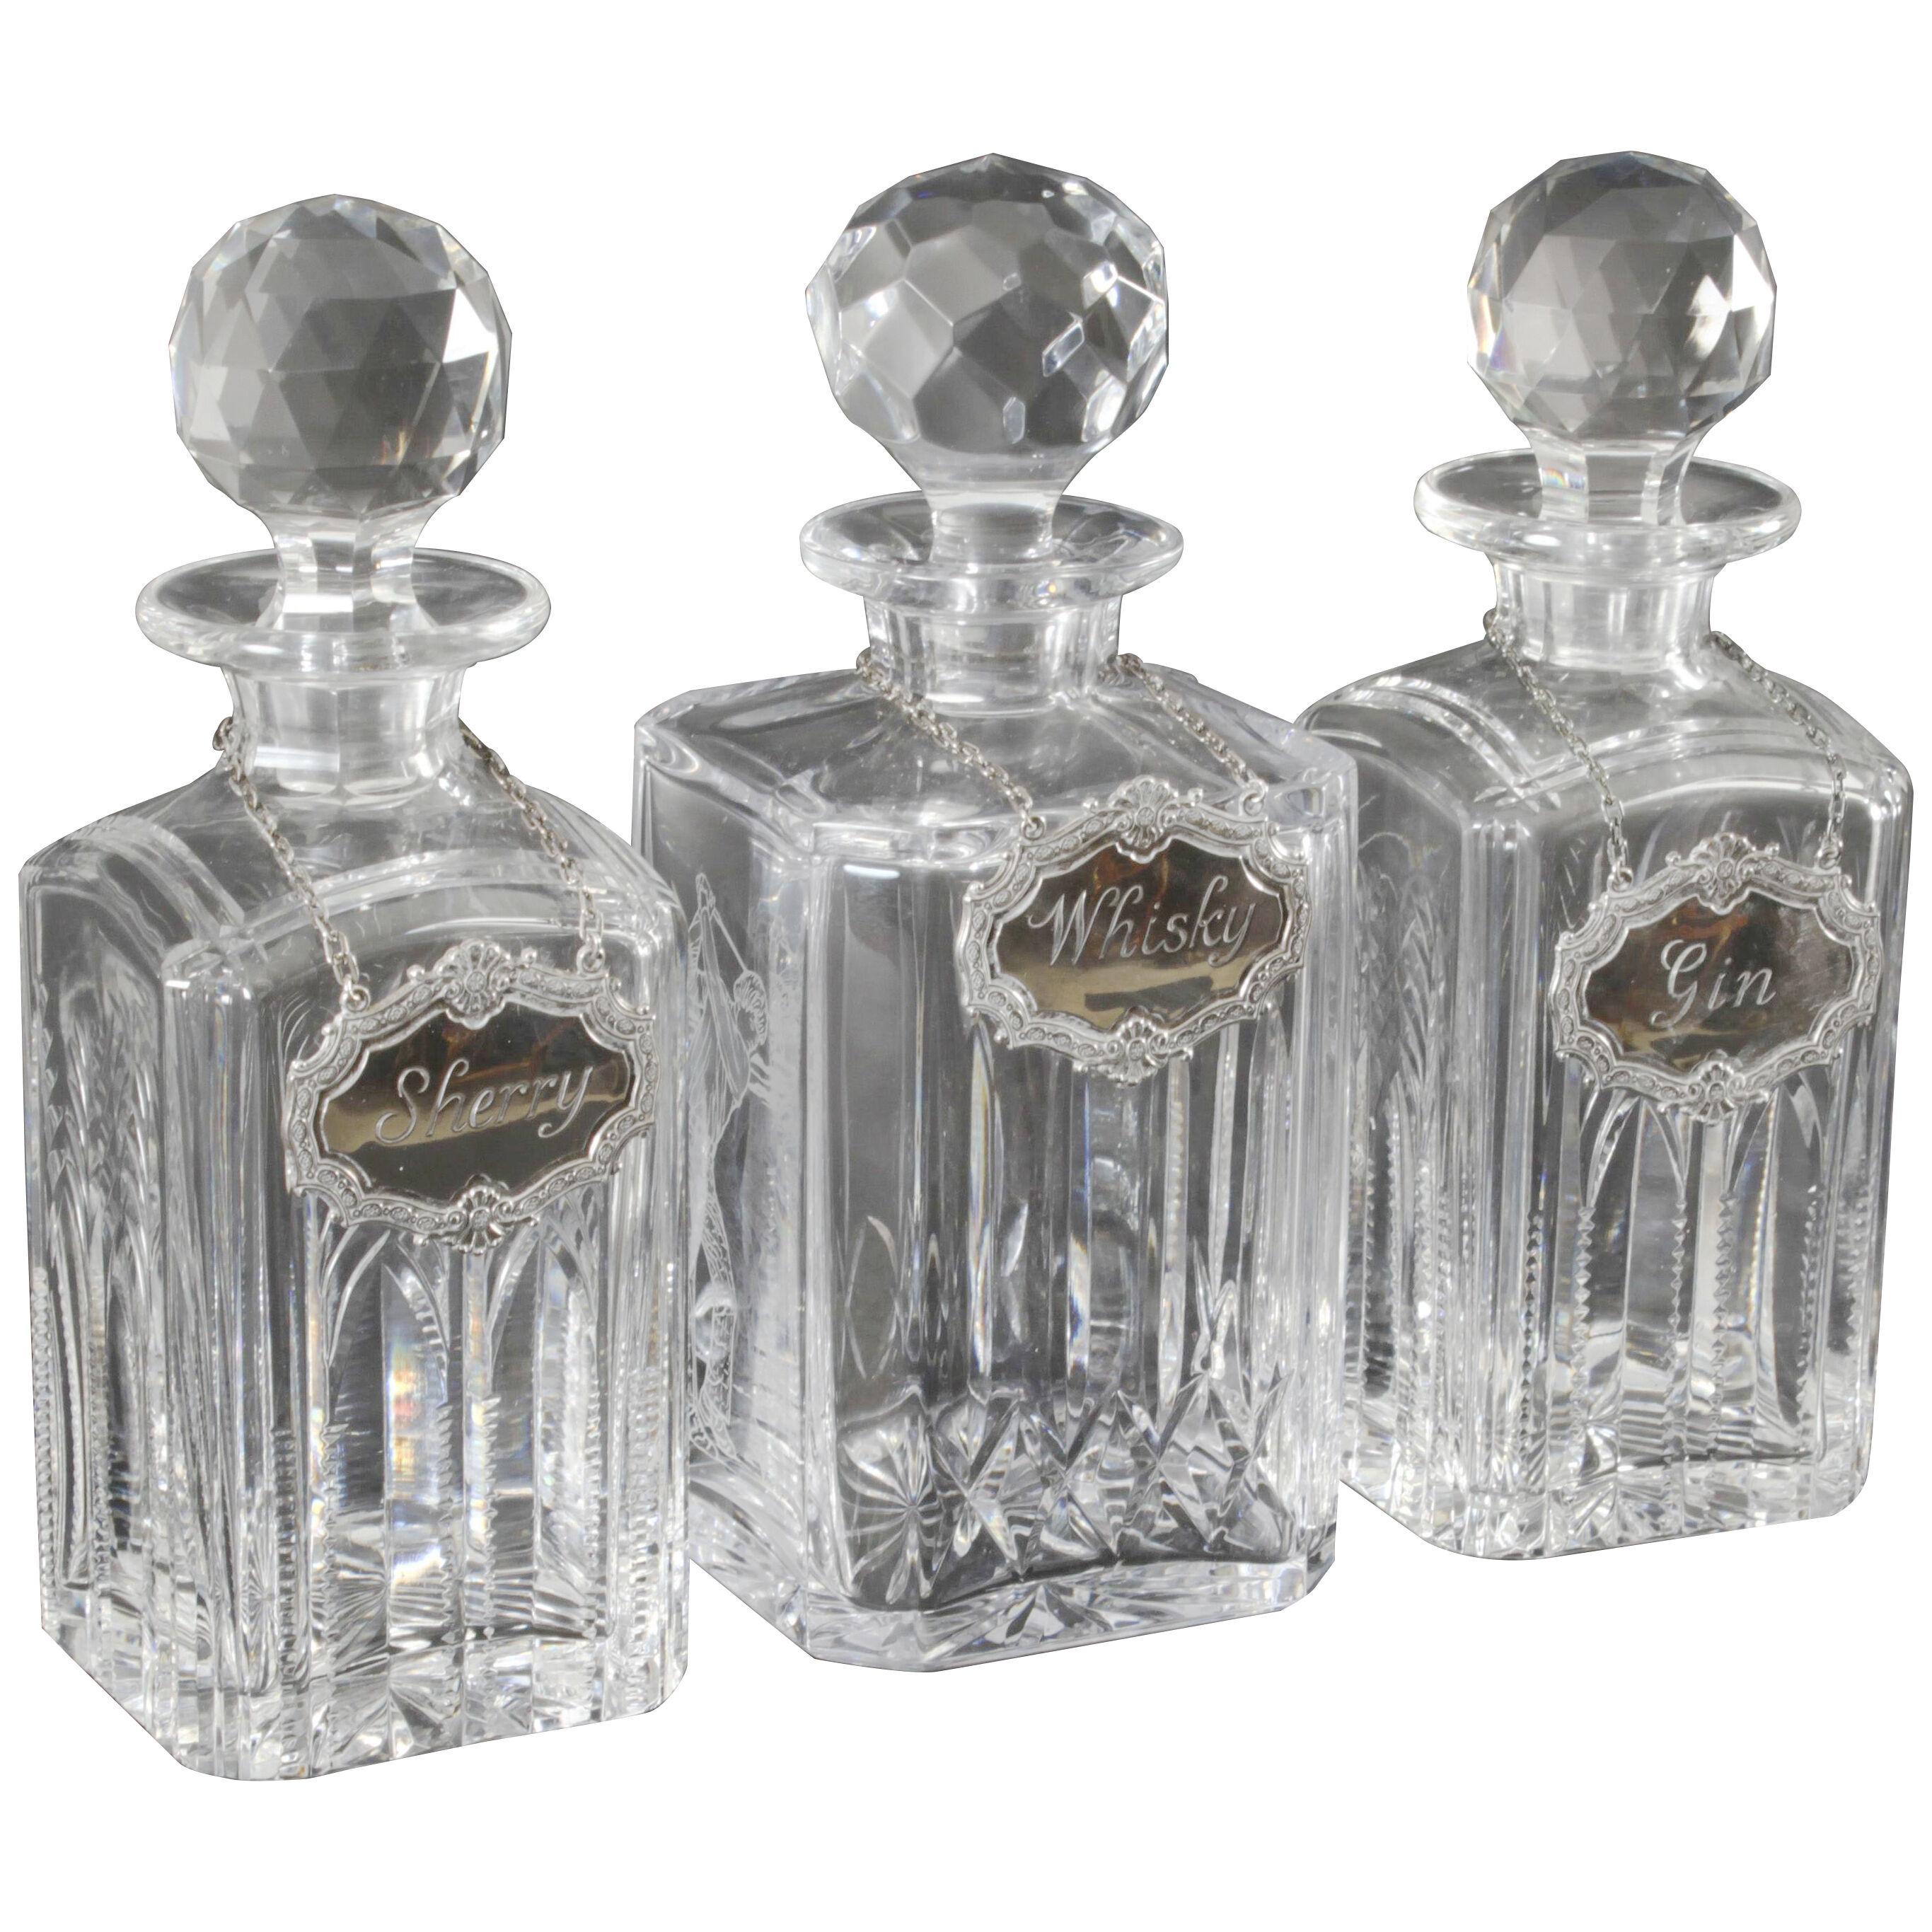 Vintage Group of 3 Crystal Cut Glass Decanters 20th C